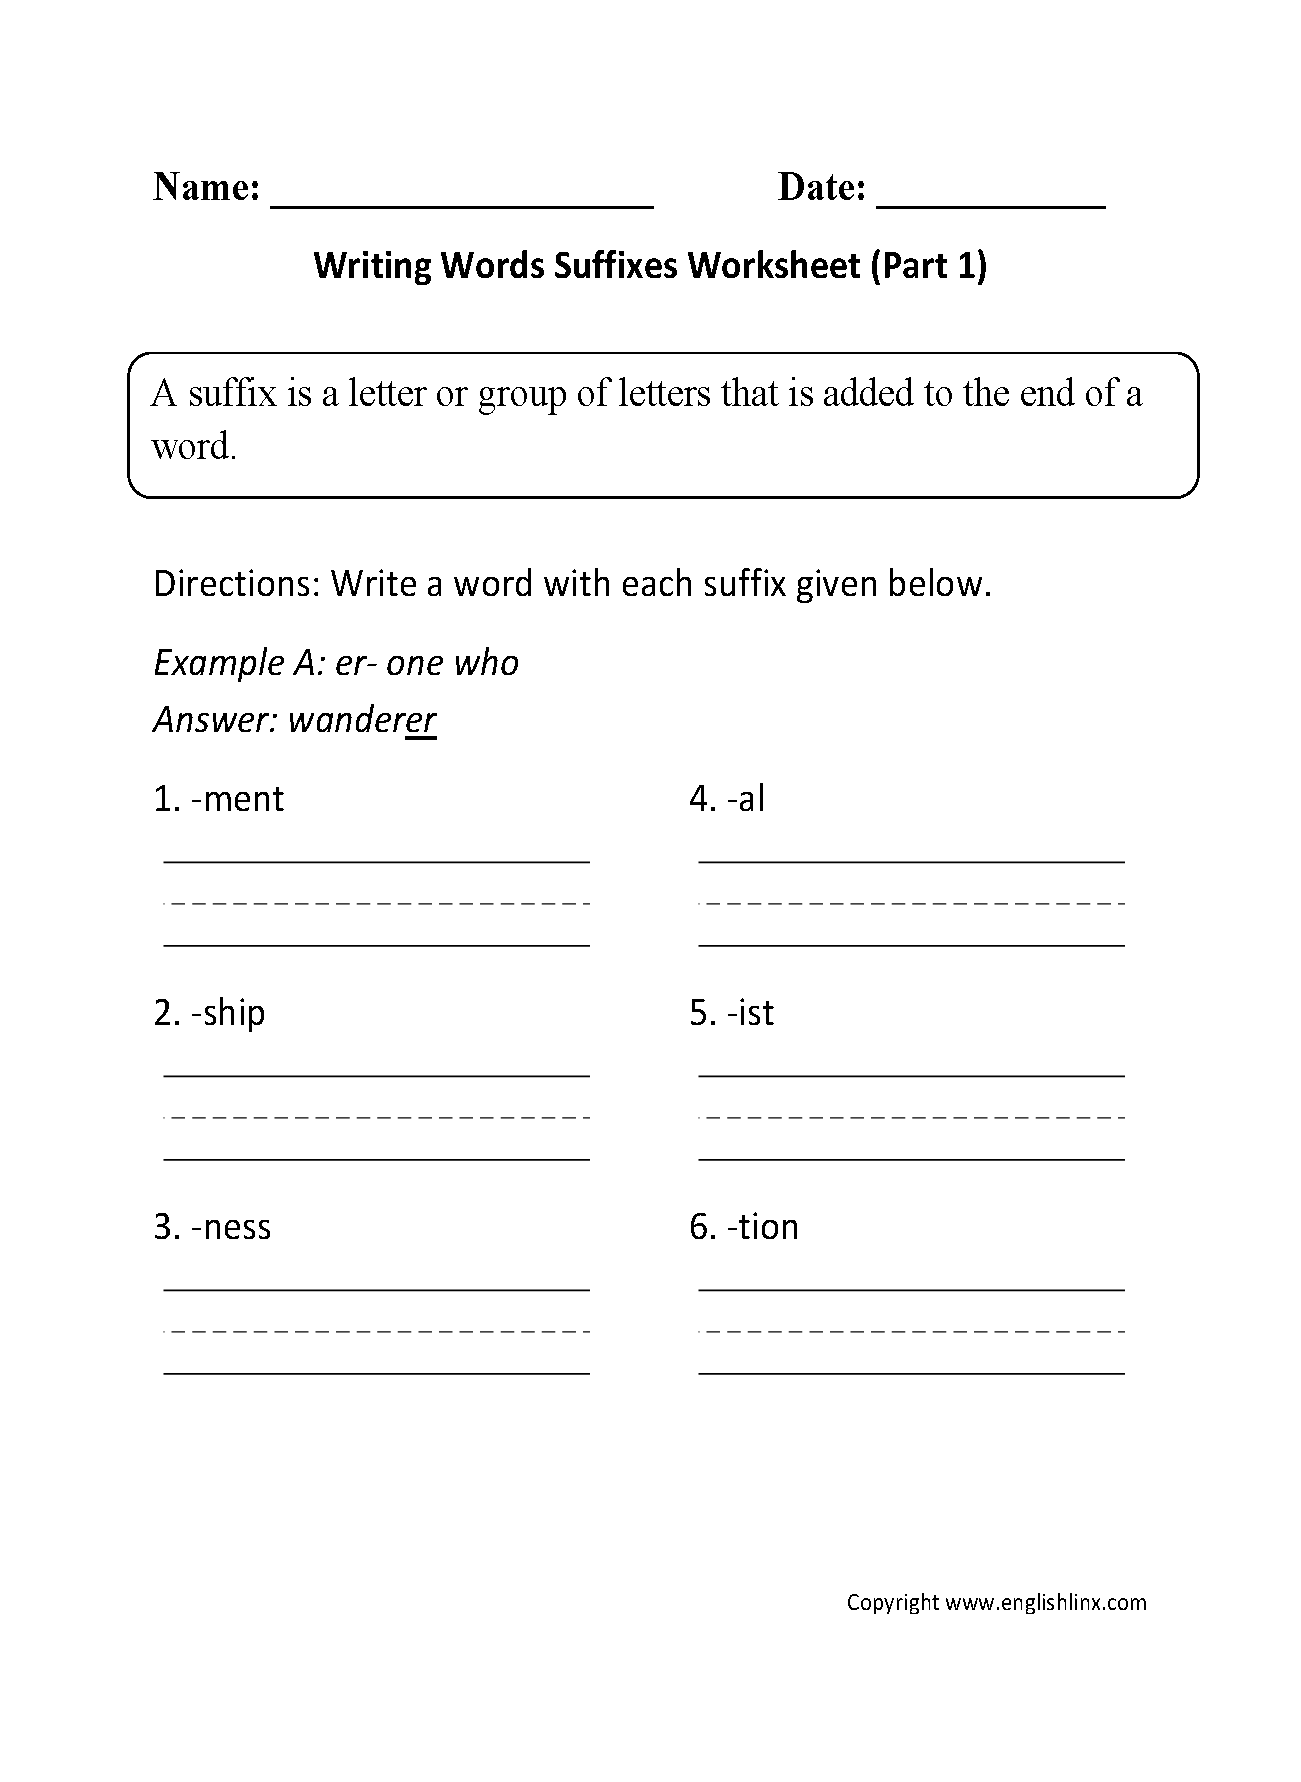 Writing Words Suffixes Worksheet Part 1